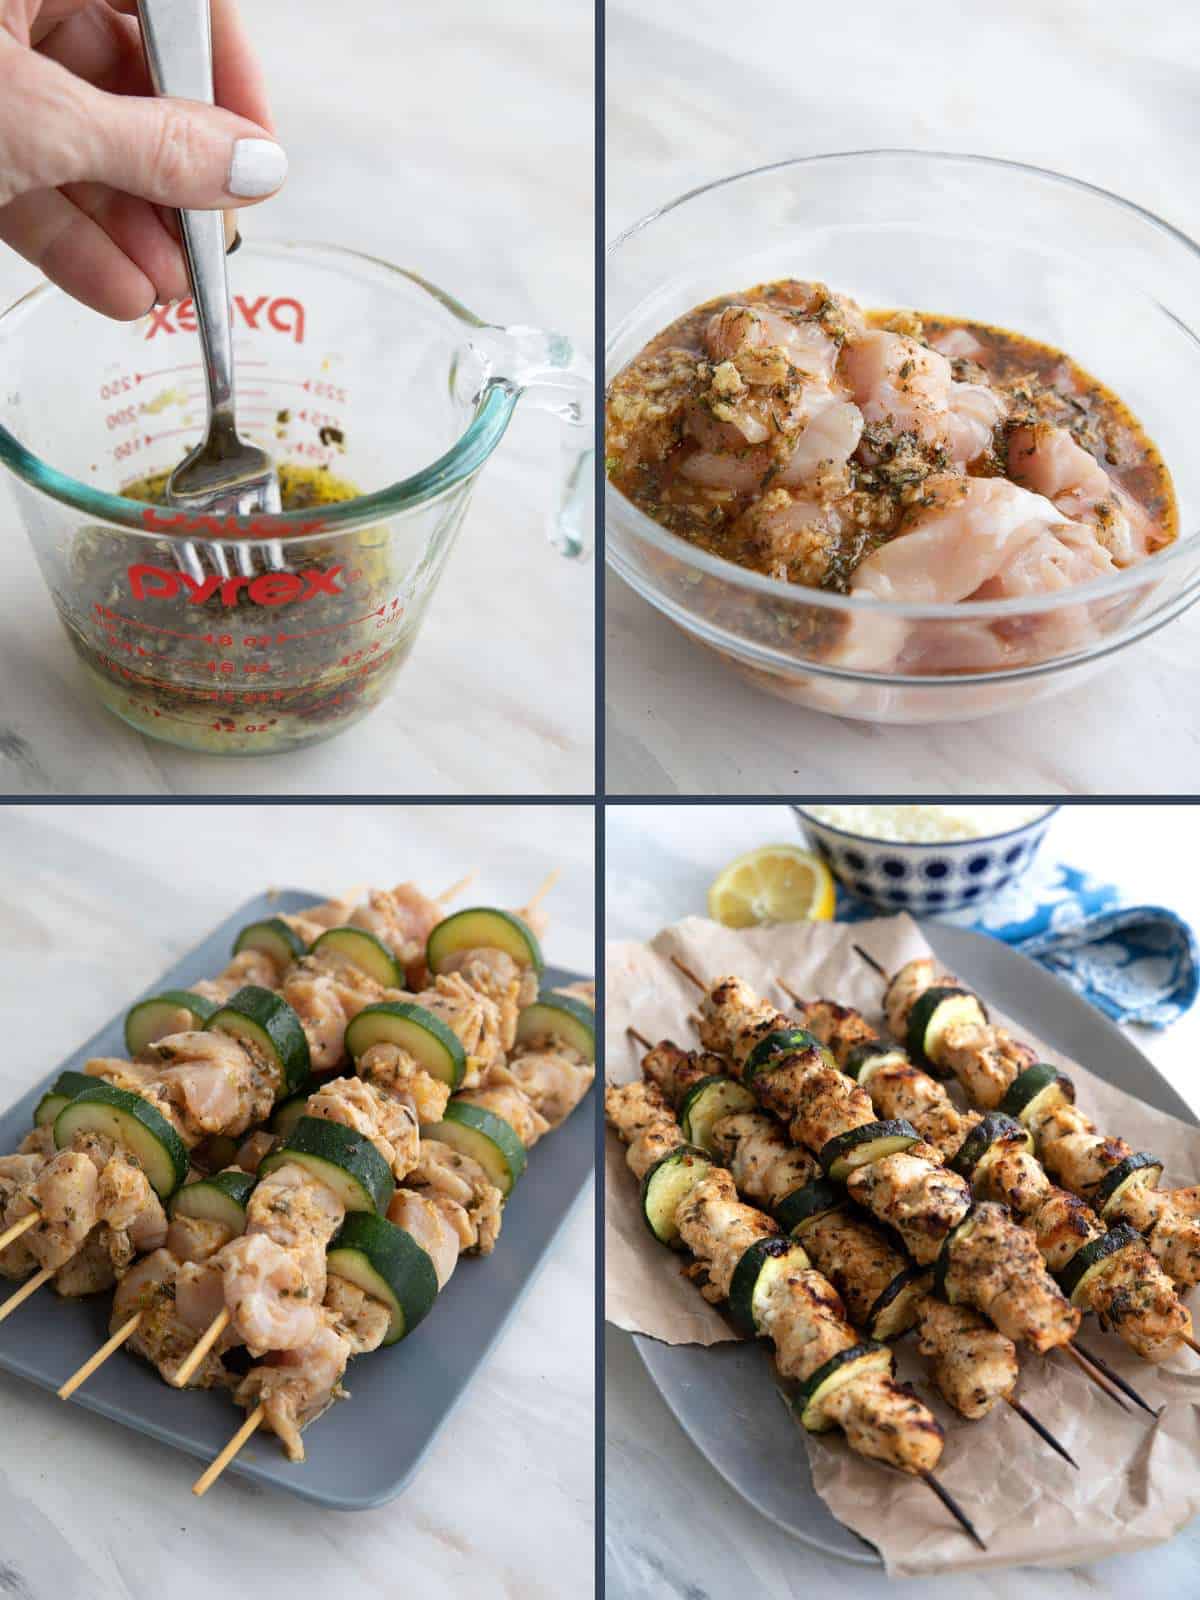 A collage of 4 images showing how to make Souvlaki Chicken.